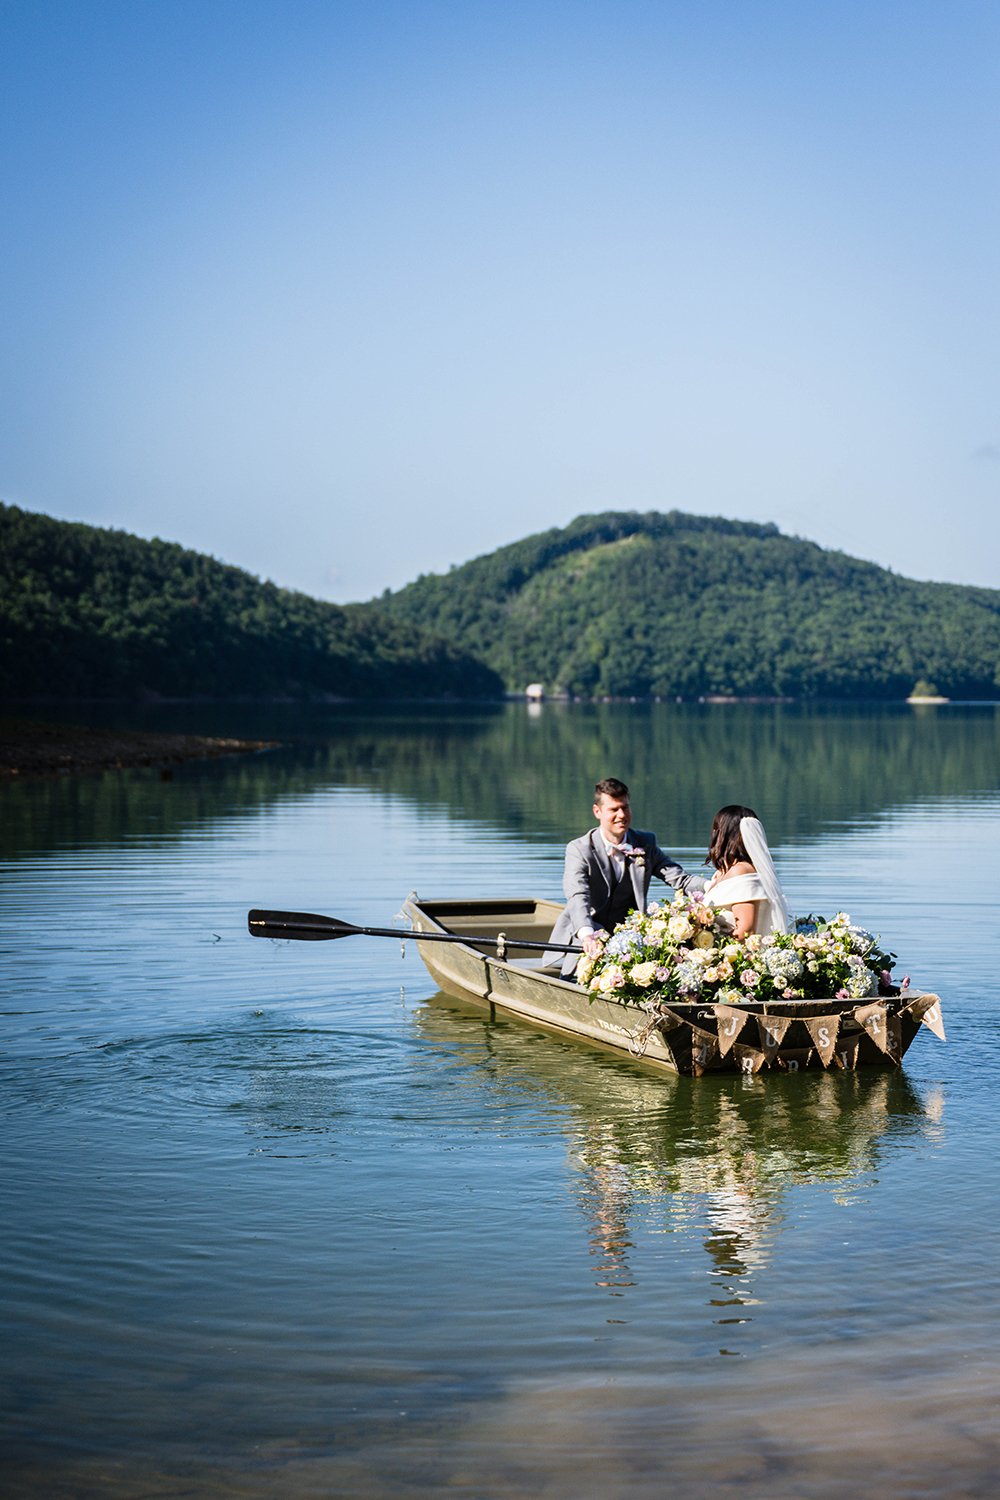 A wedding couple embark on a row boat adorned with boat florals into Carvin’s Cove in Roanoke, Virginia during their elopement.